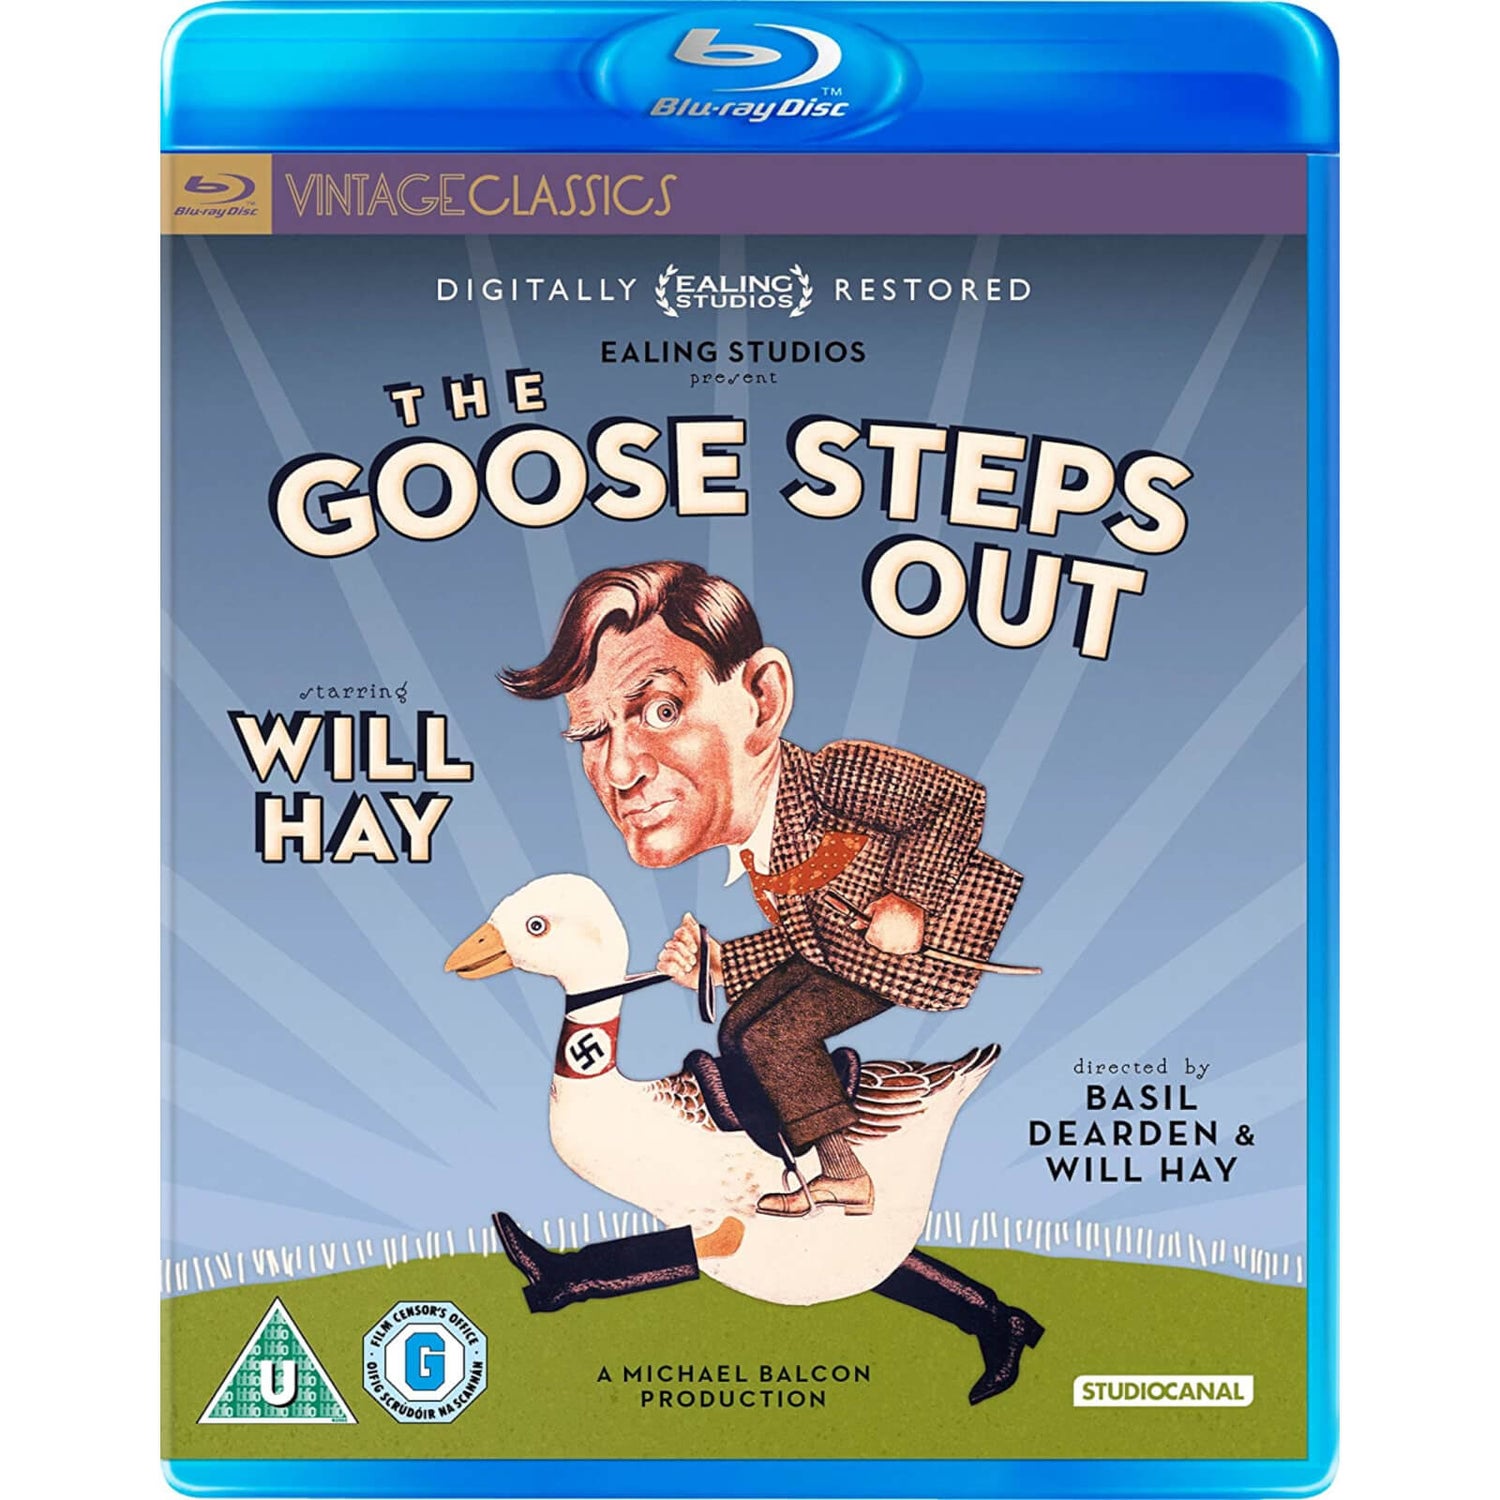 The Goose Steps Out - 75th Anniversary (Digitally Restored)